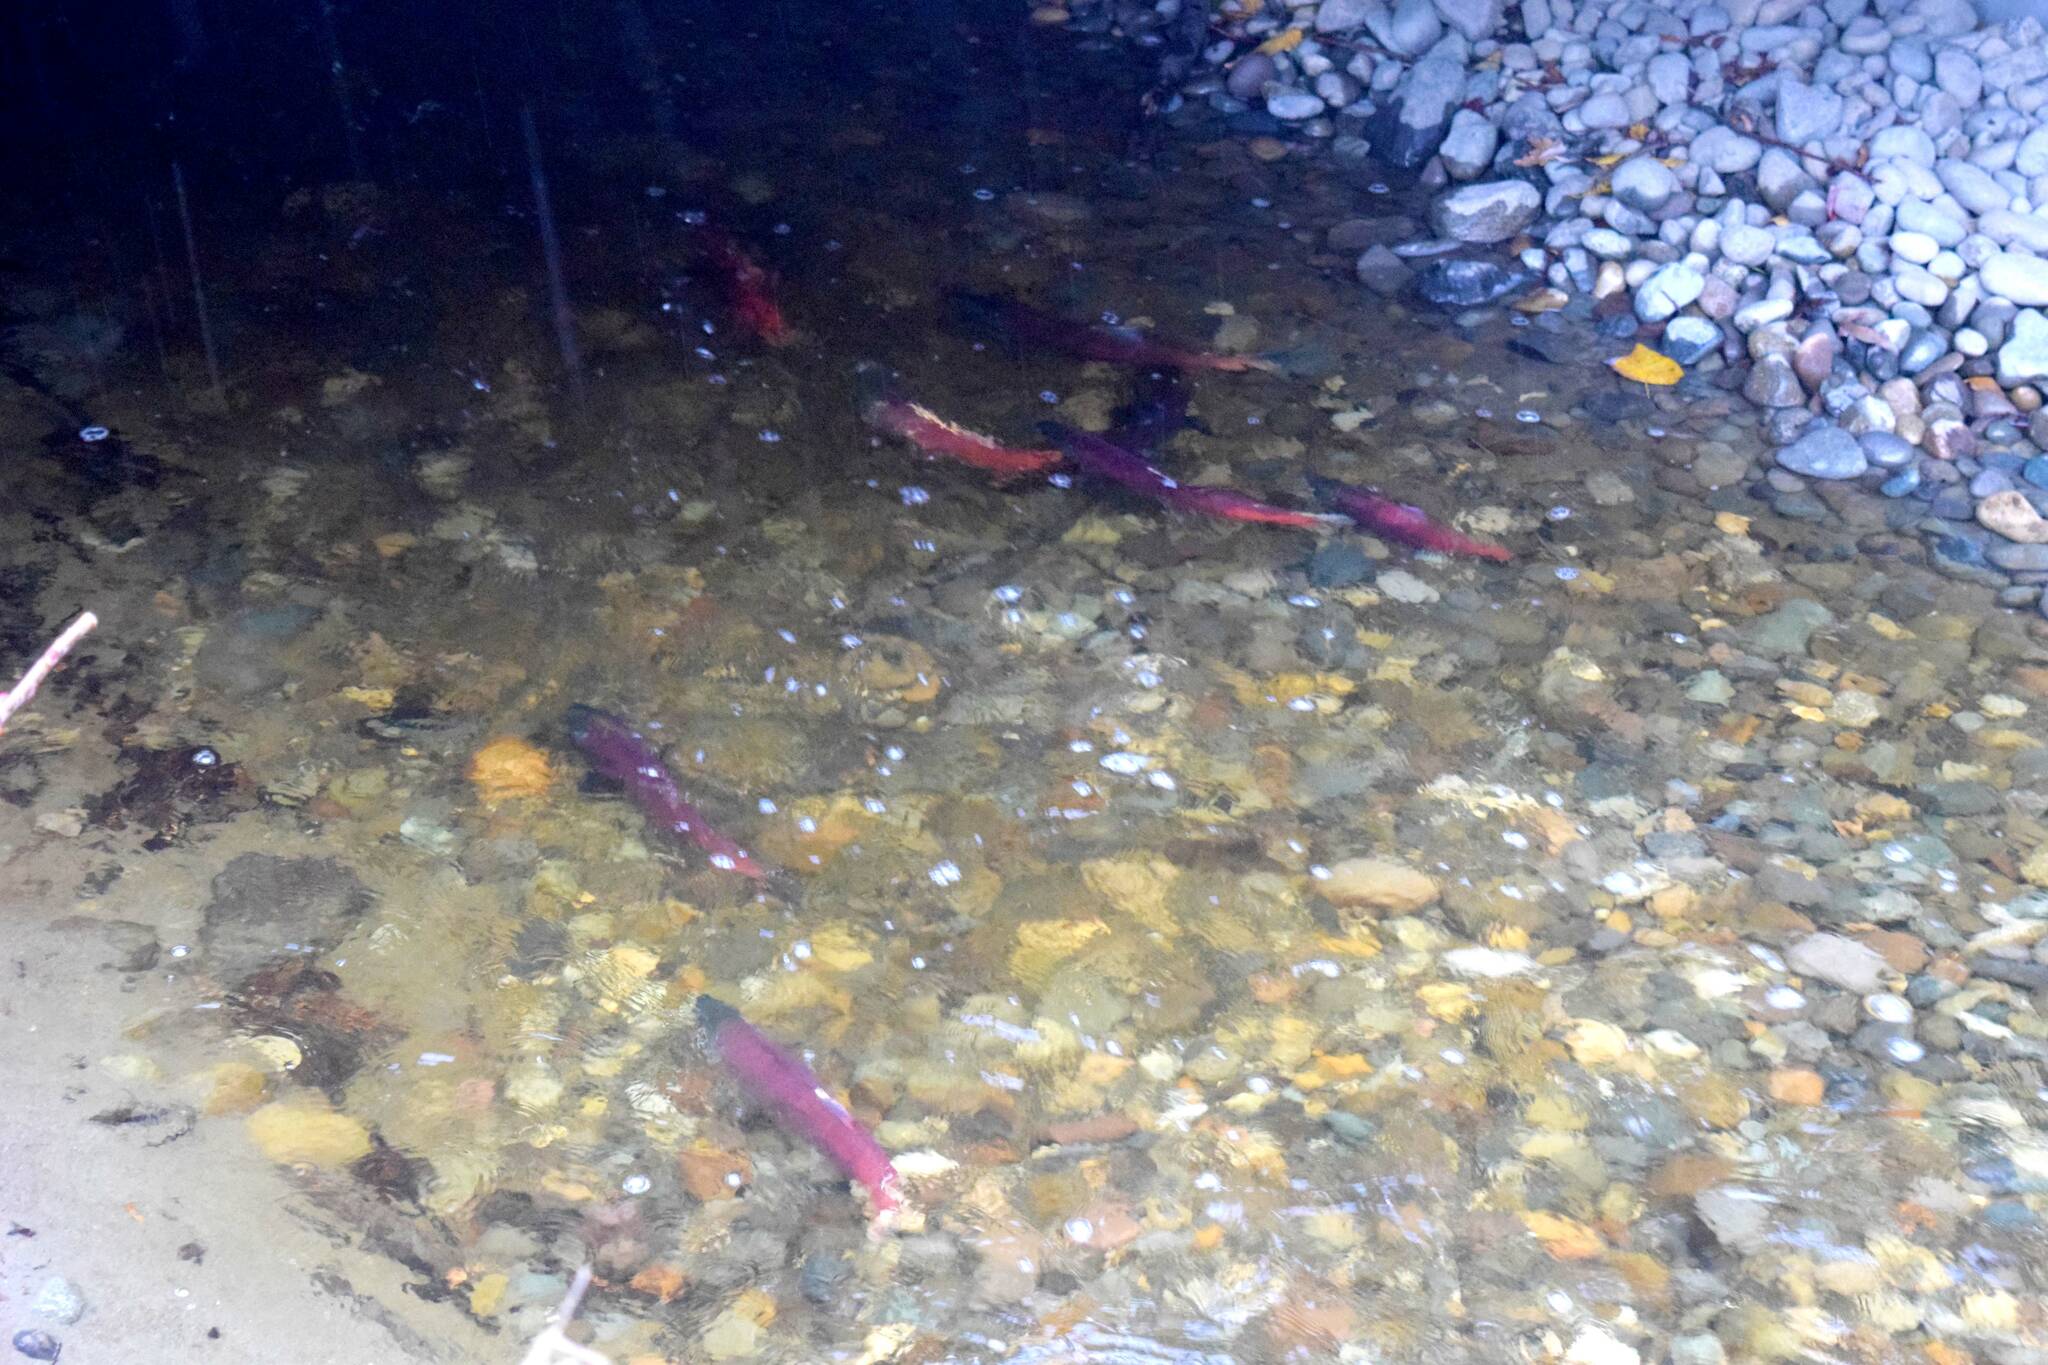 A pool of kokanee salmon at Ebright Creek in Sammamish. Photo by Conor Wilson/Valley Record.